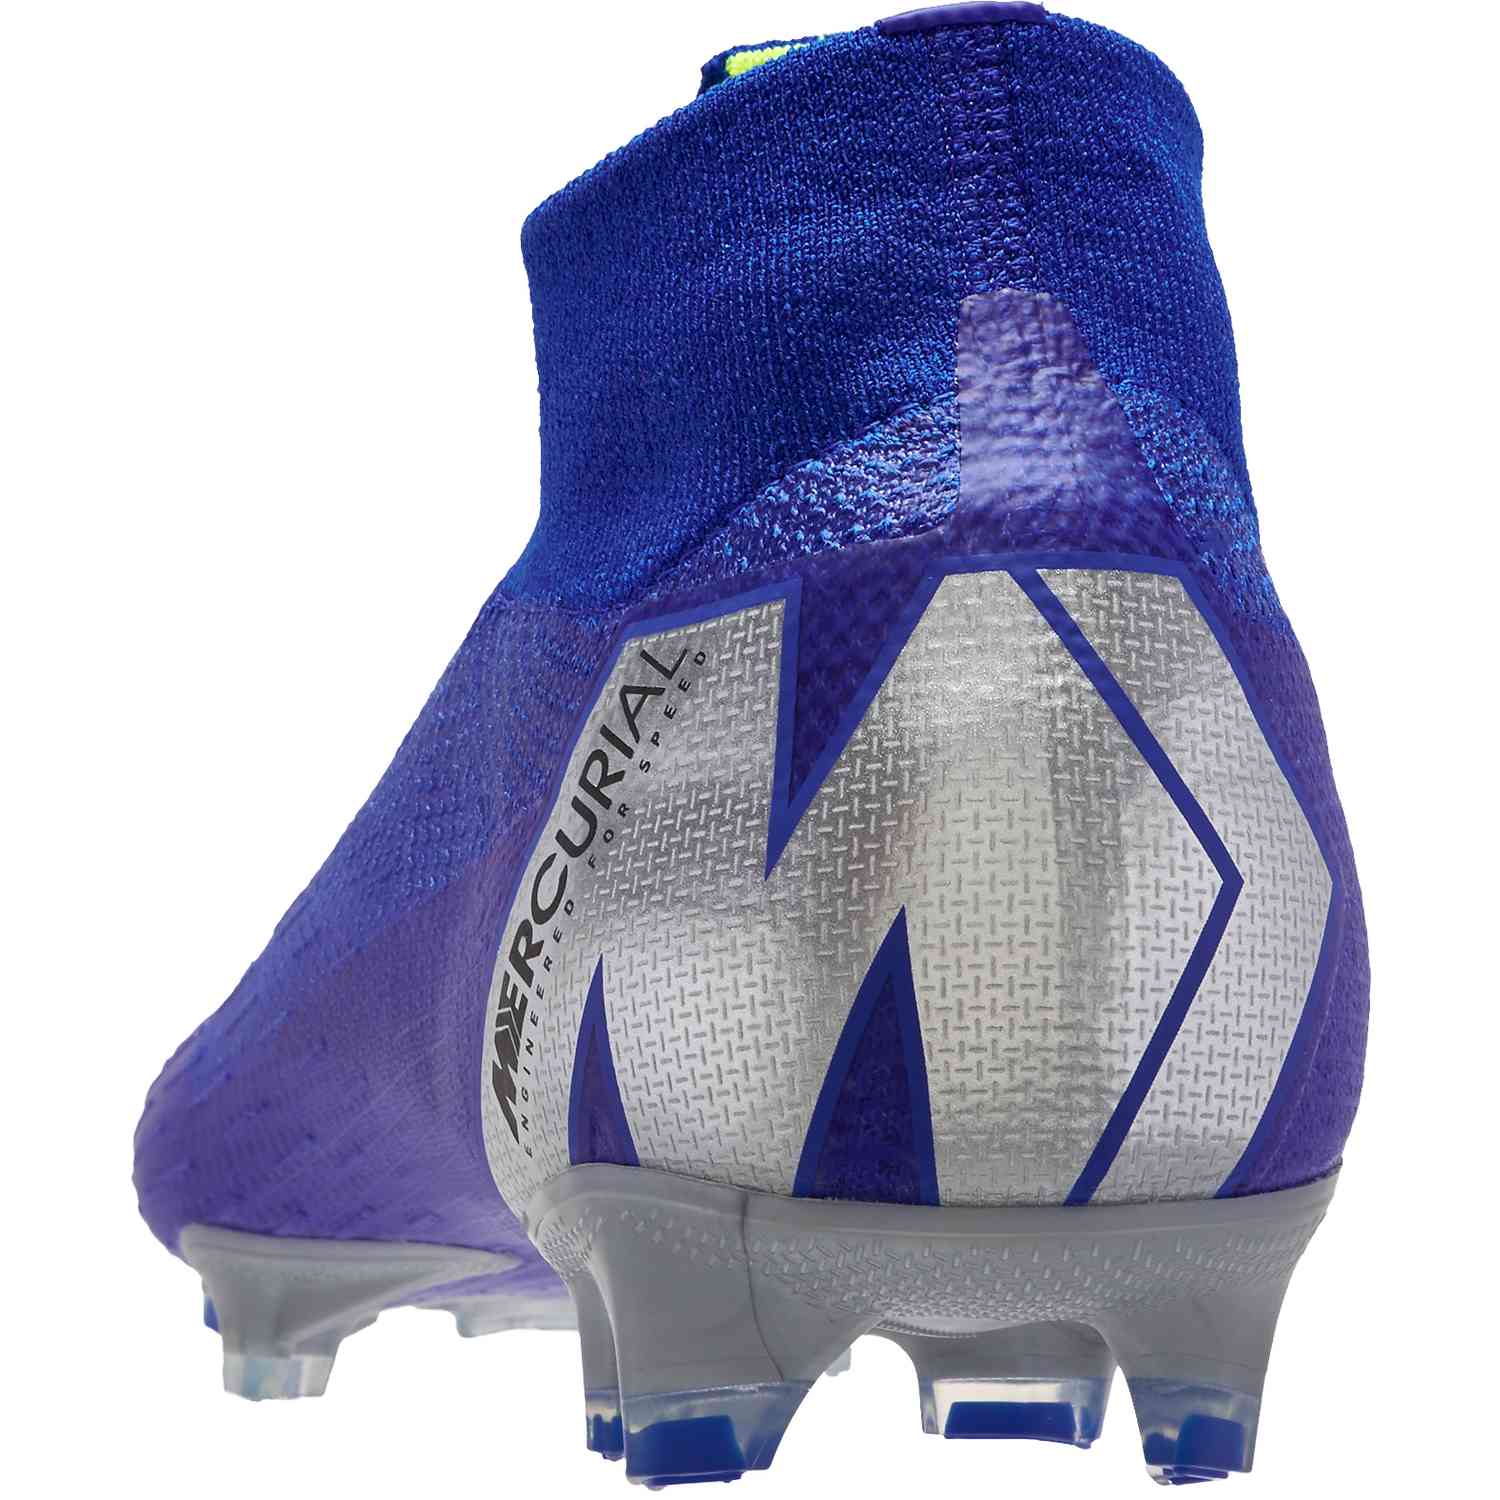 Nike Mercurial Superfly 6 Pro FG 'Game Over Pack YouTube